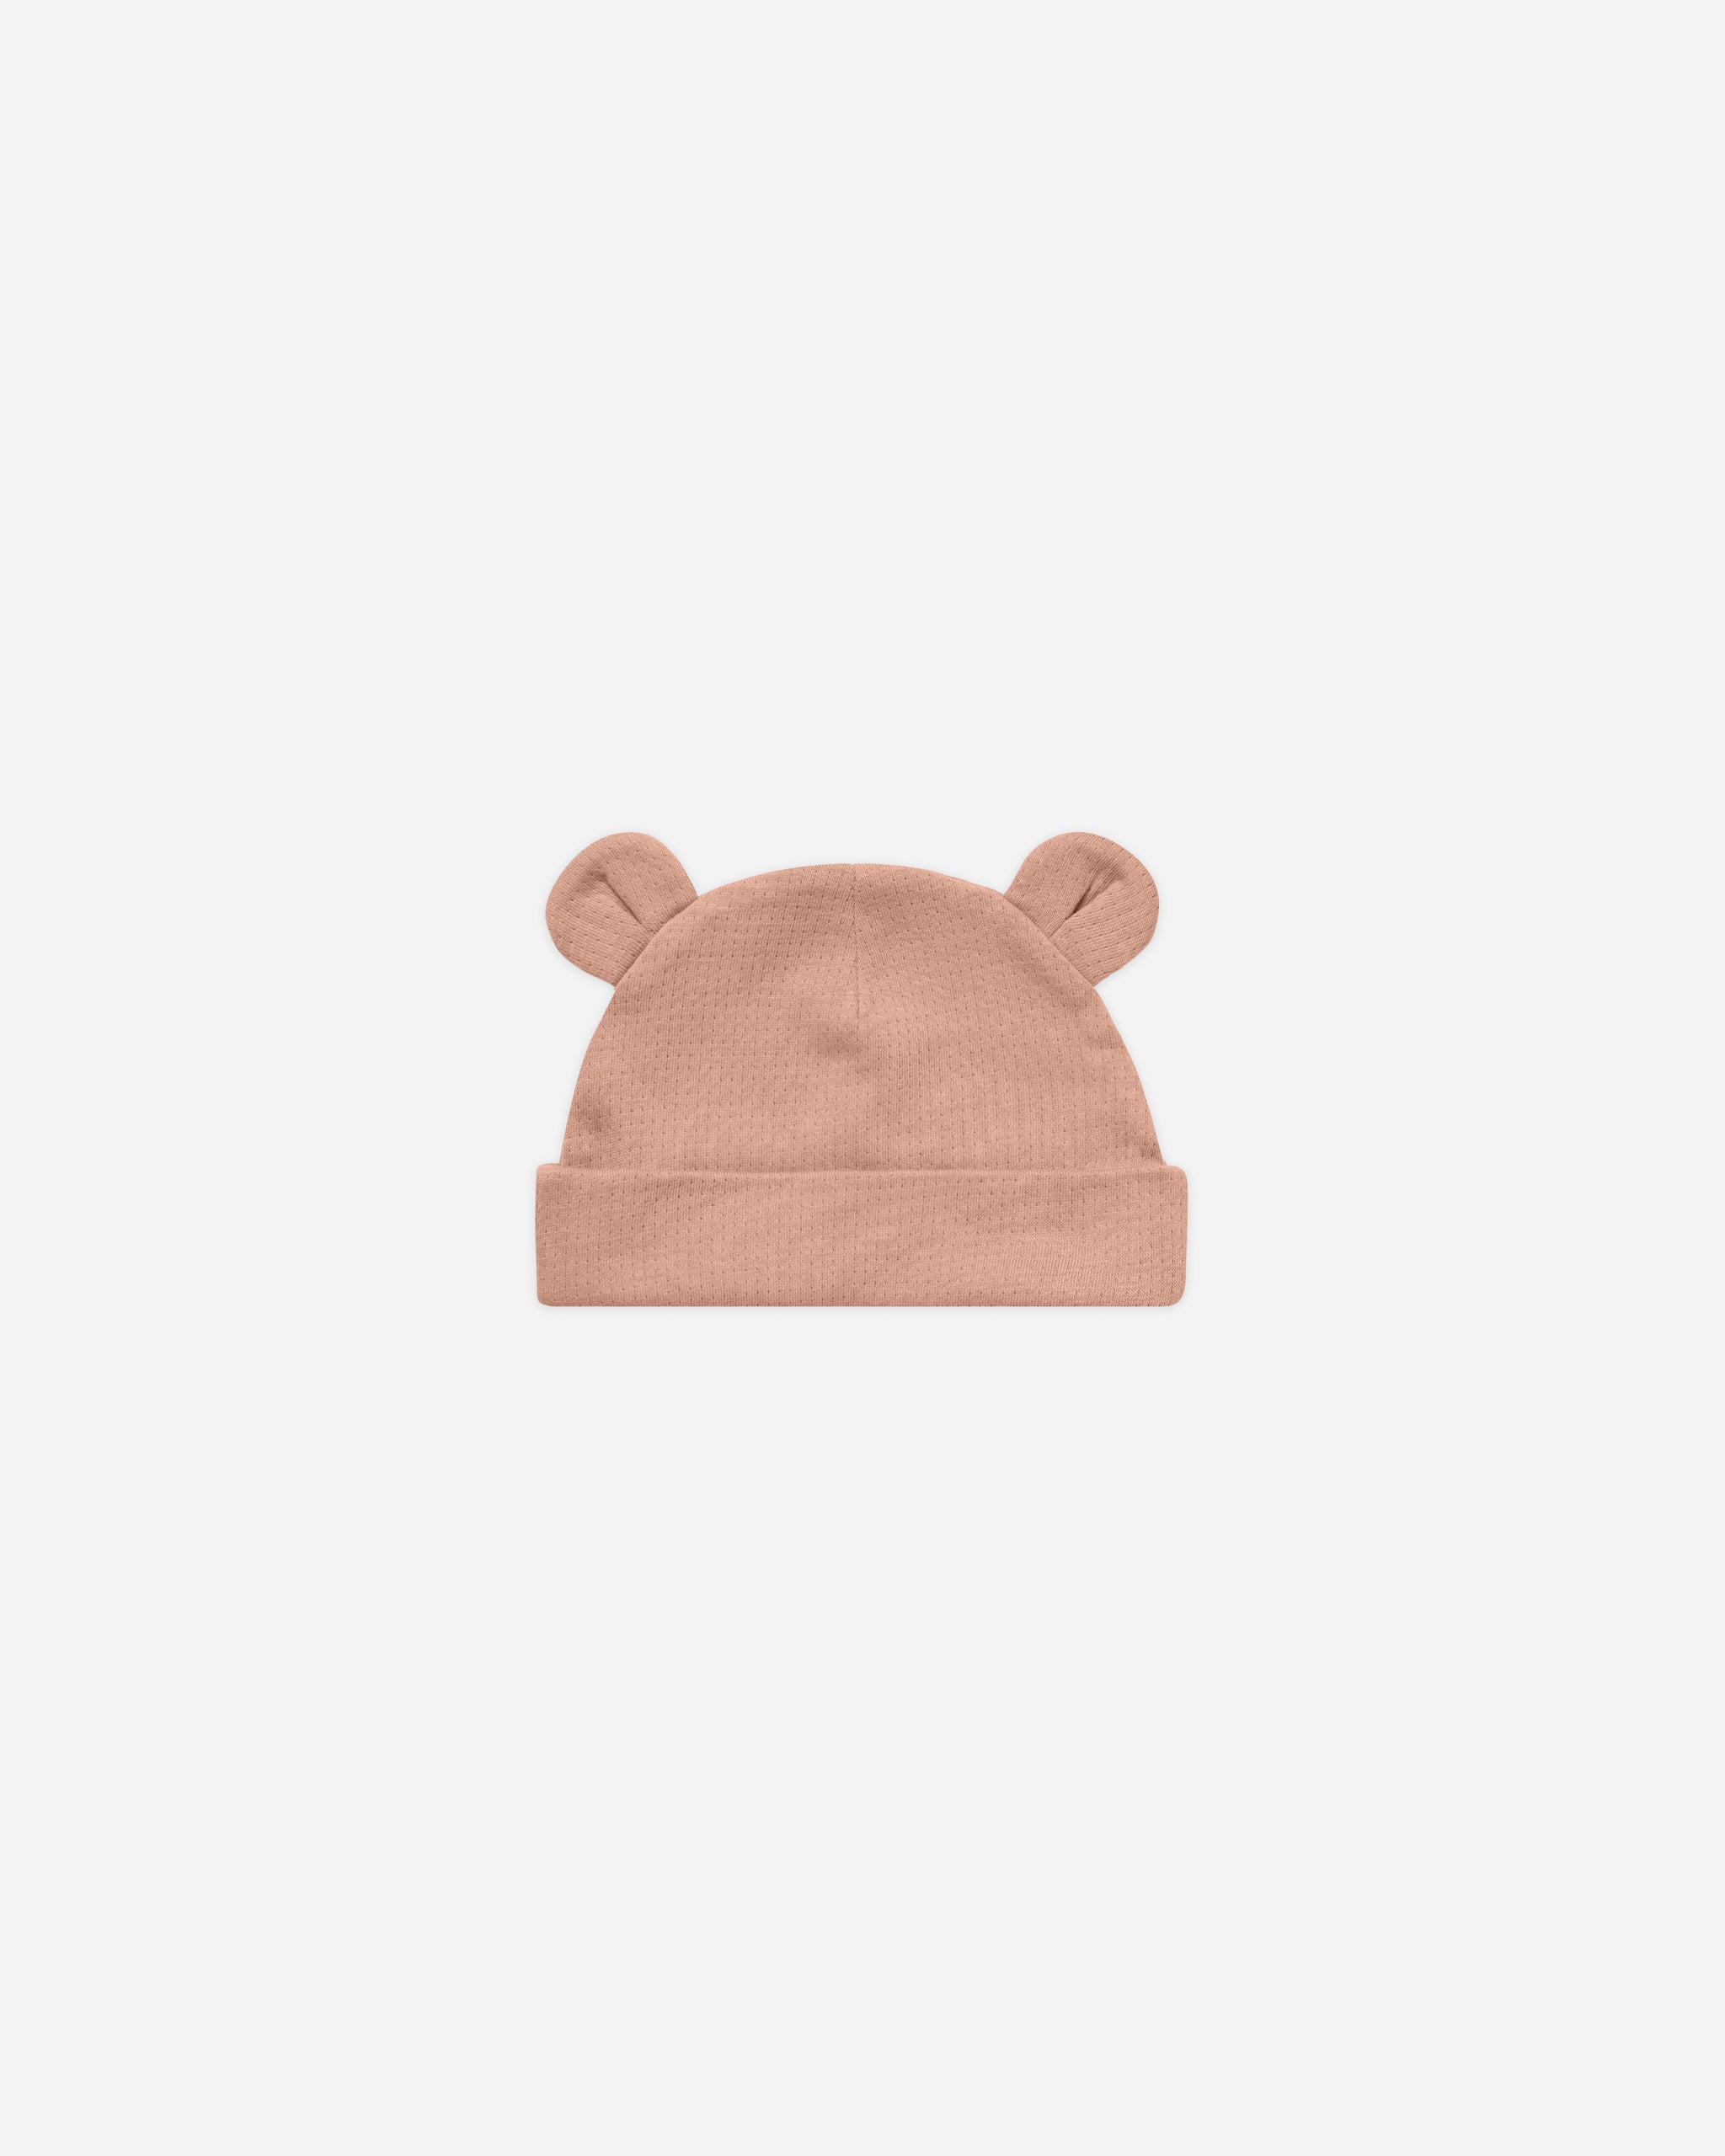 Baby Bear Beanie || Rose - Rylee + Cru | Kids Clothes | Trendy Baby Clothes | Modern Infant Outfits |